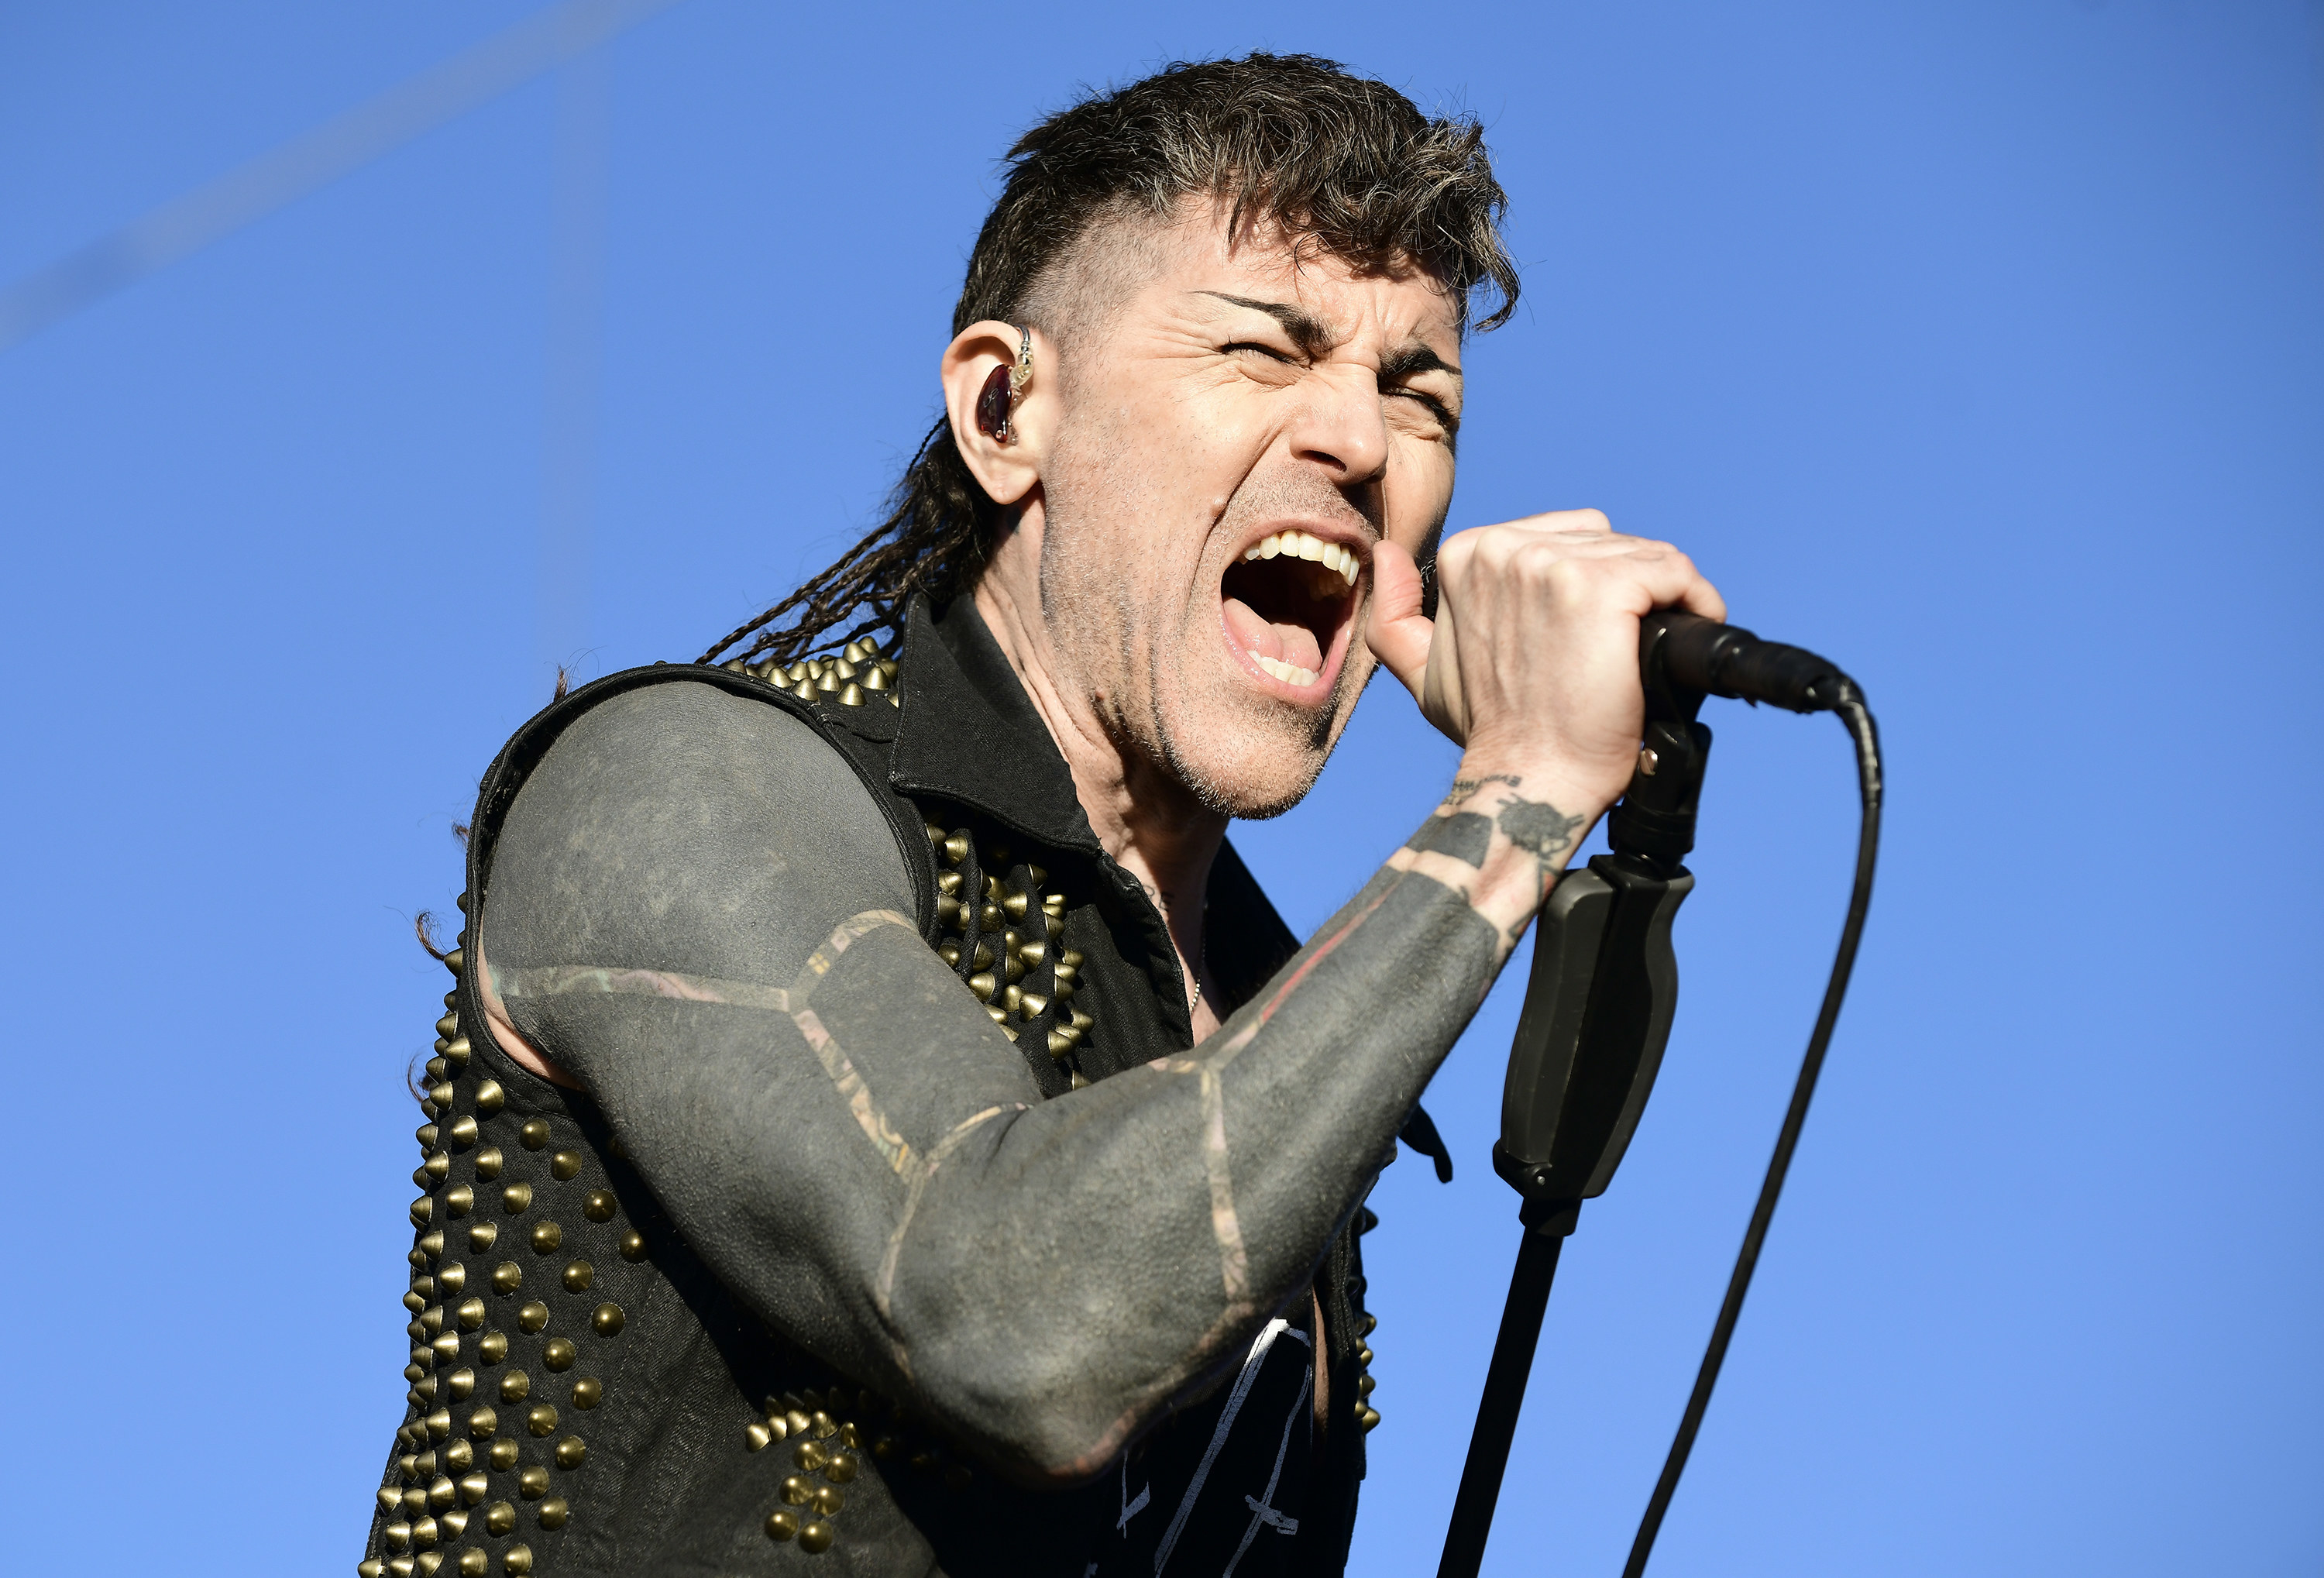 Davey Havok performing at the 2022 When We Were Young Festival